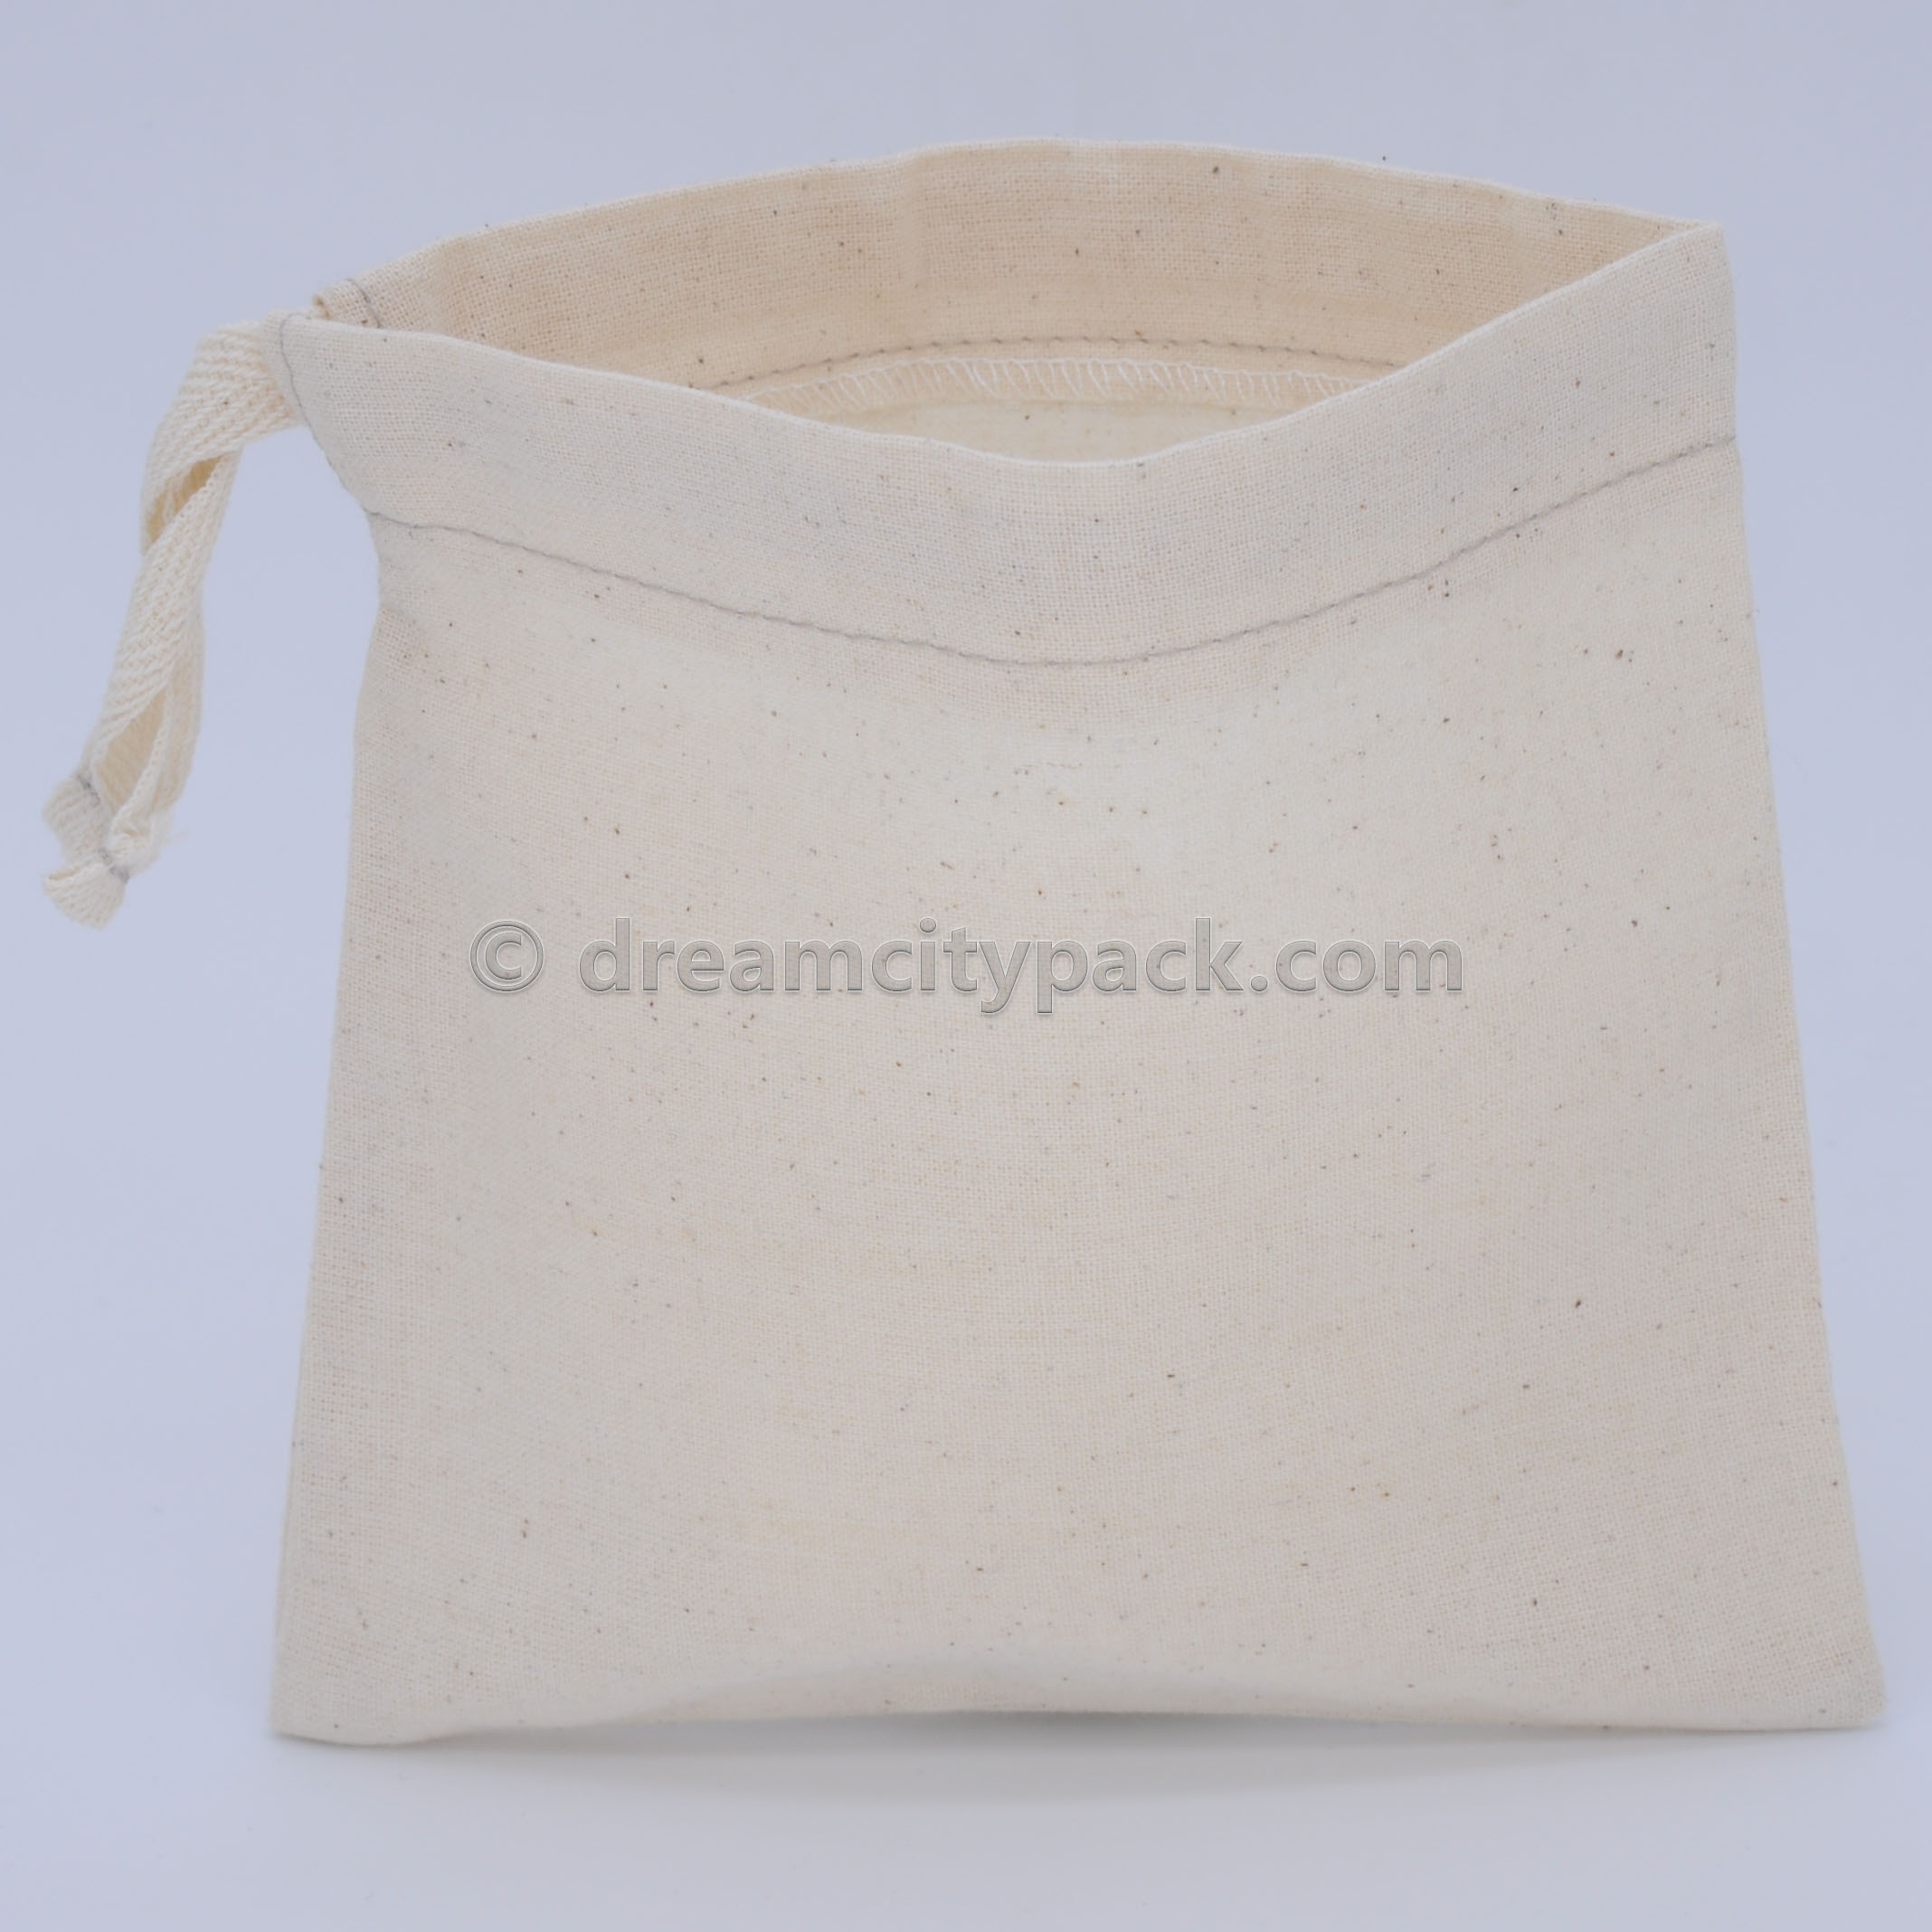 Custom Cotton Dust Bags for Handbags Extra Large